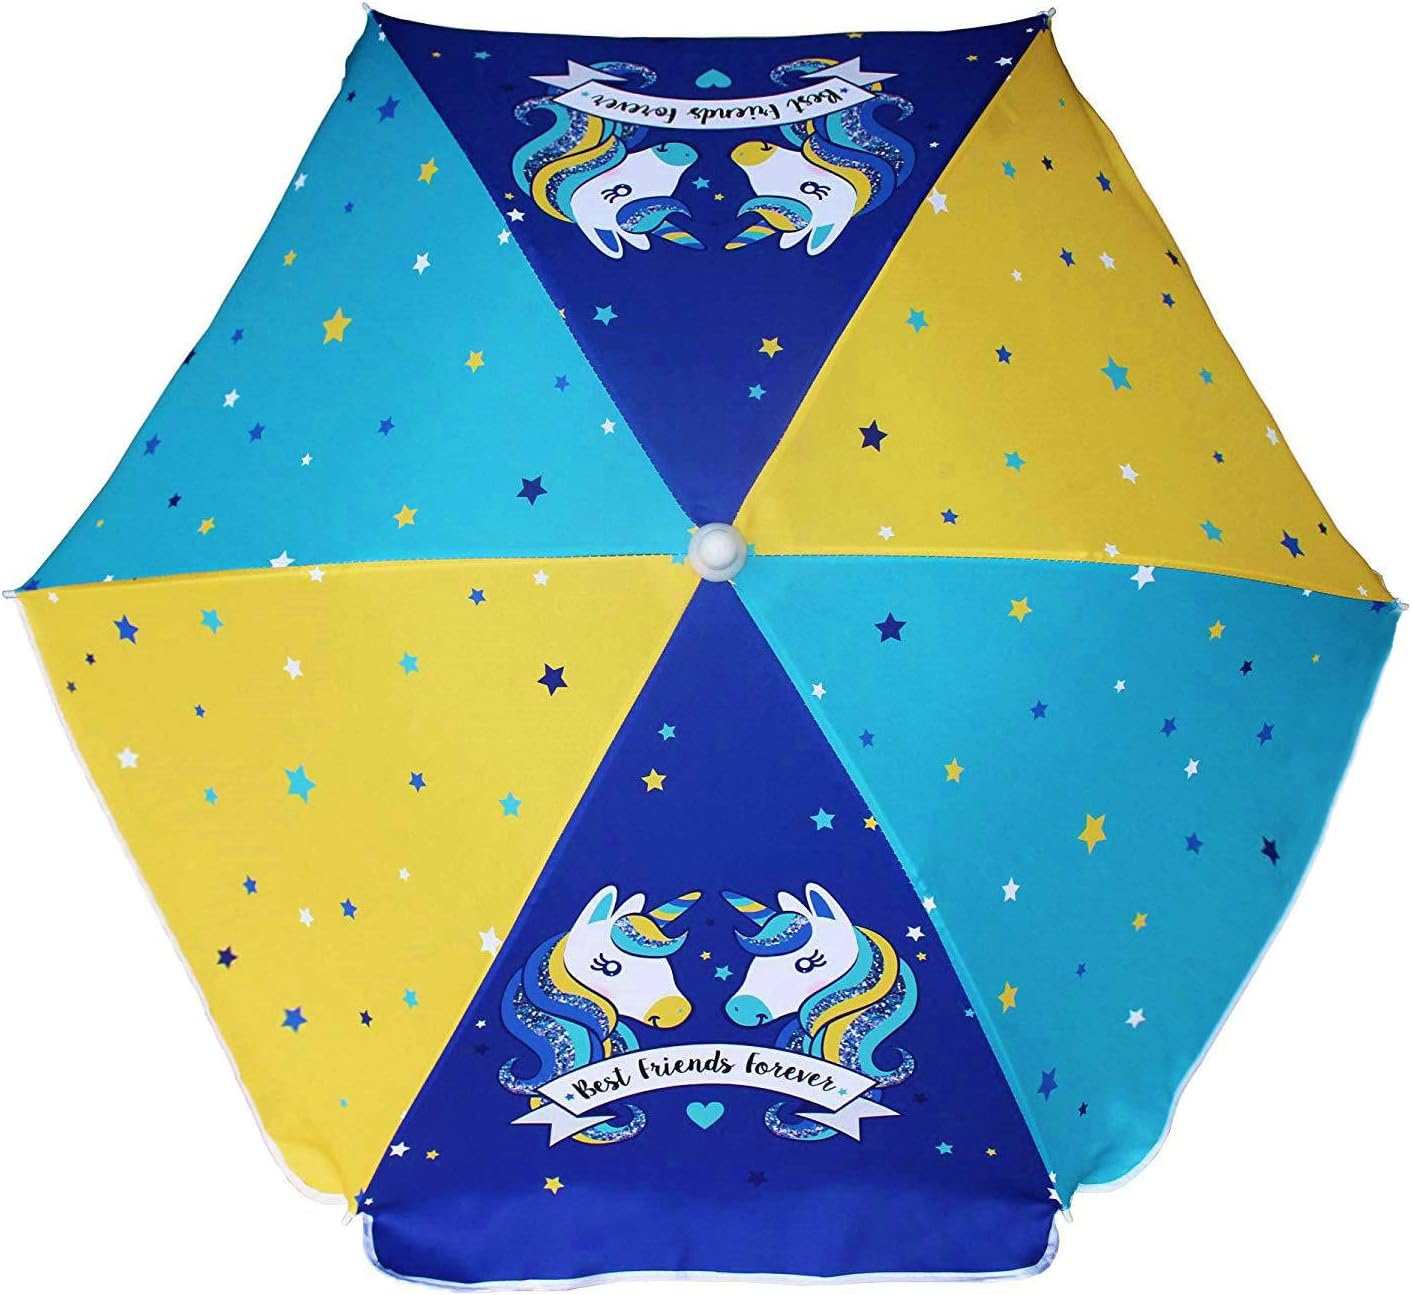 AMMSUN 47 inches kid Umbrella for Sand and Water Table Unicorn Pattern